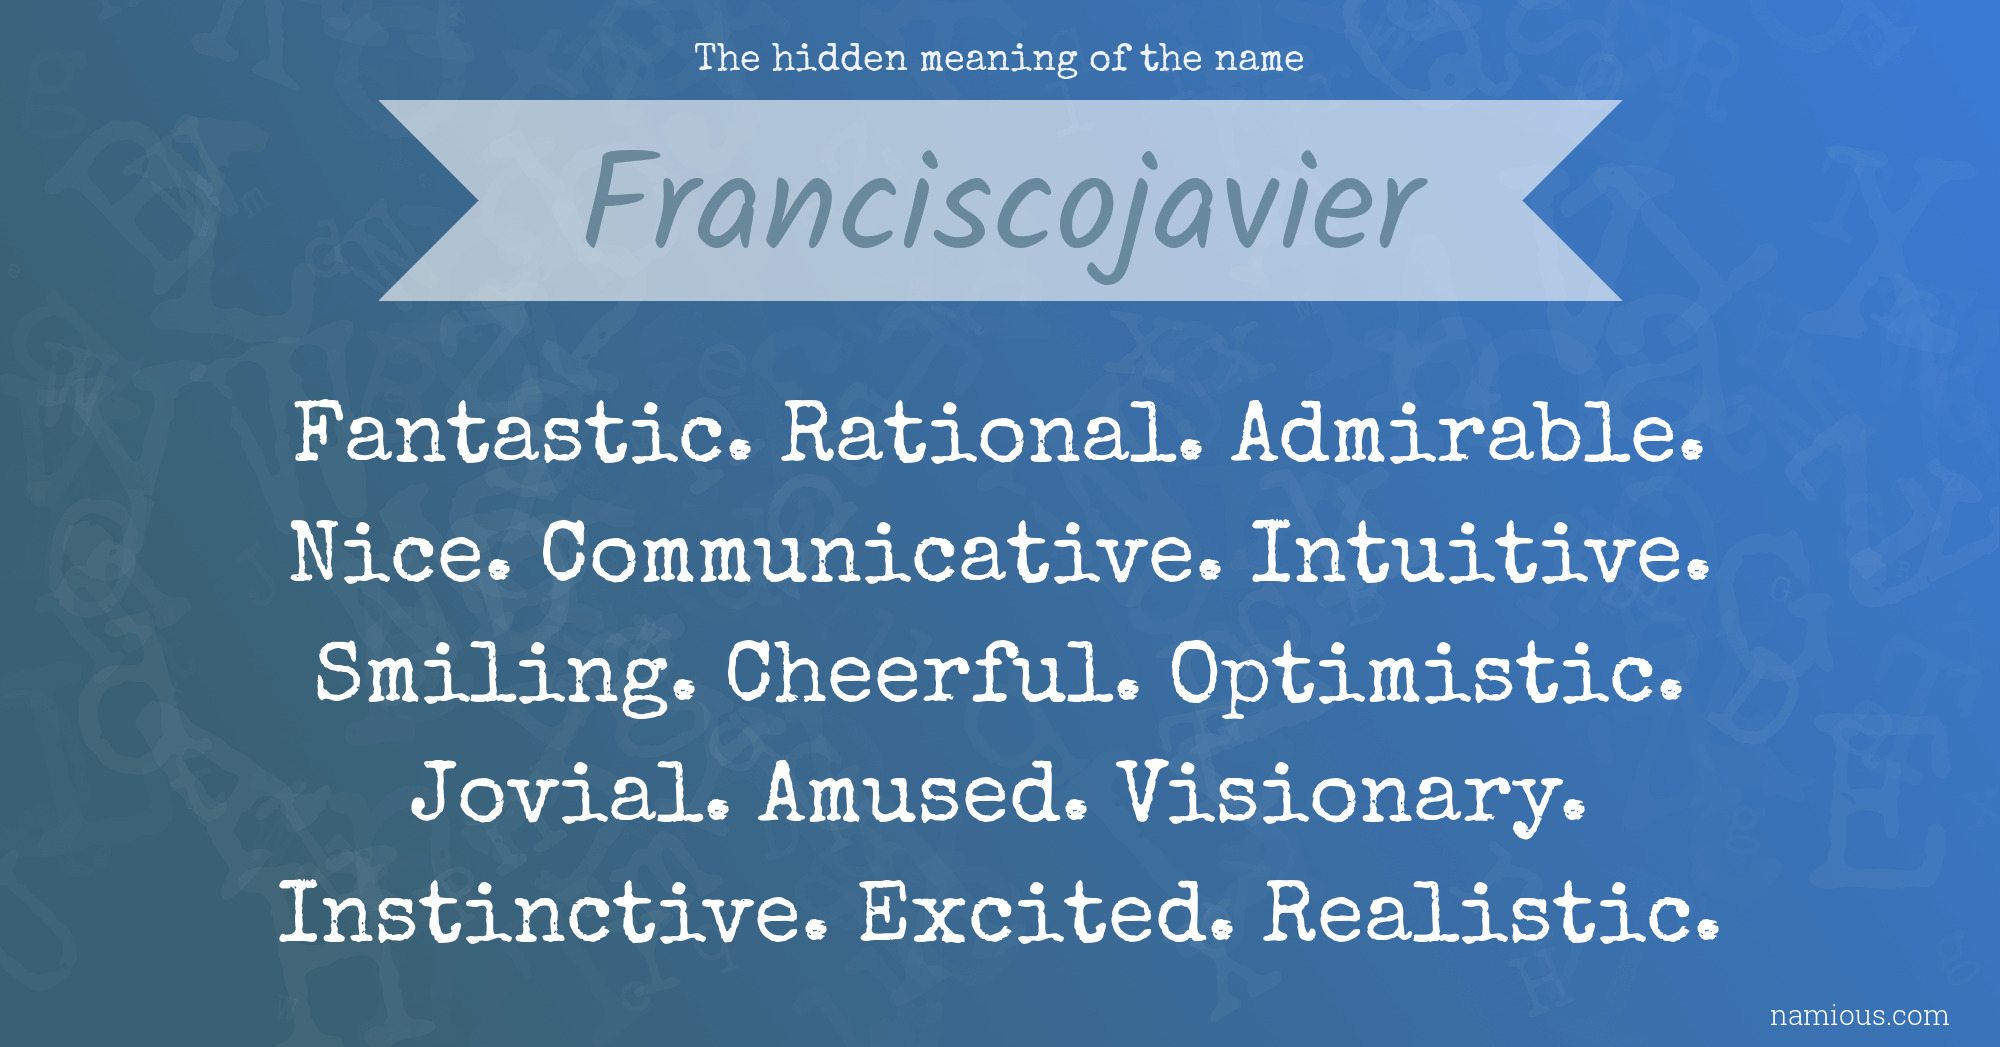 The hidden meaning of the name Franciscojavier